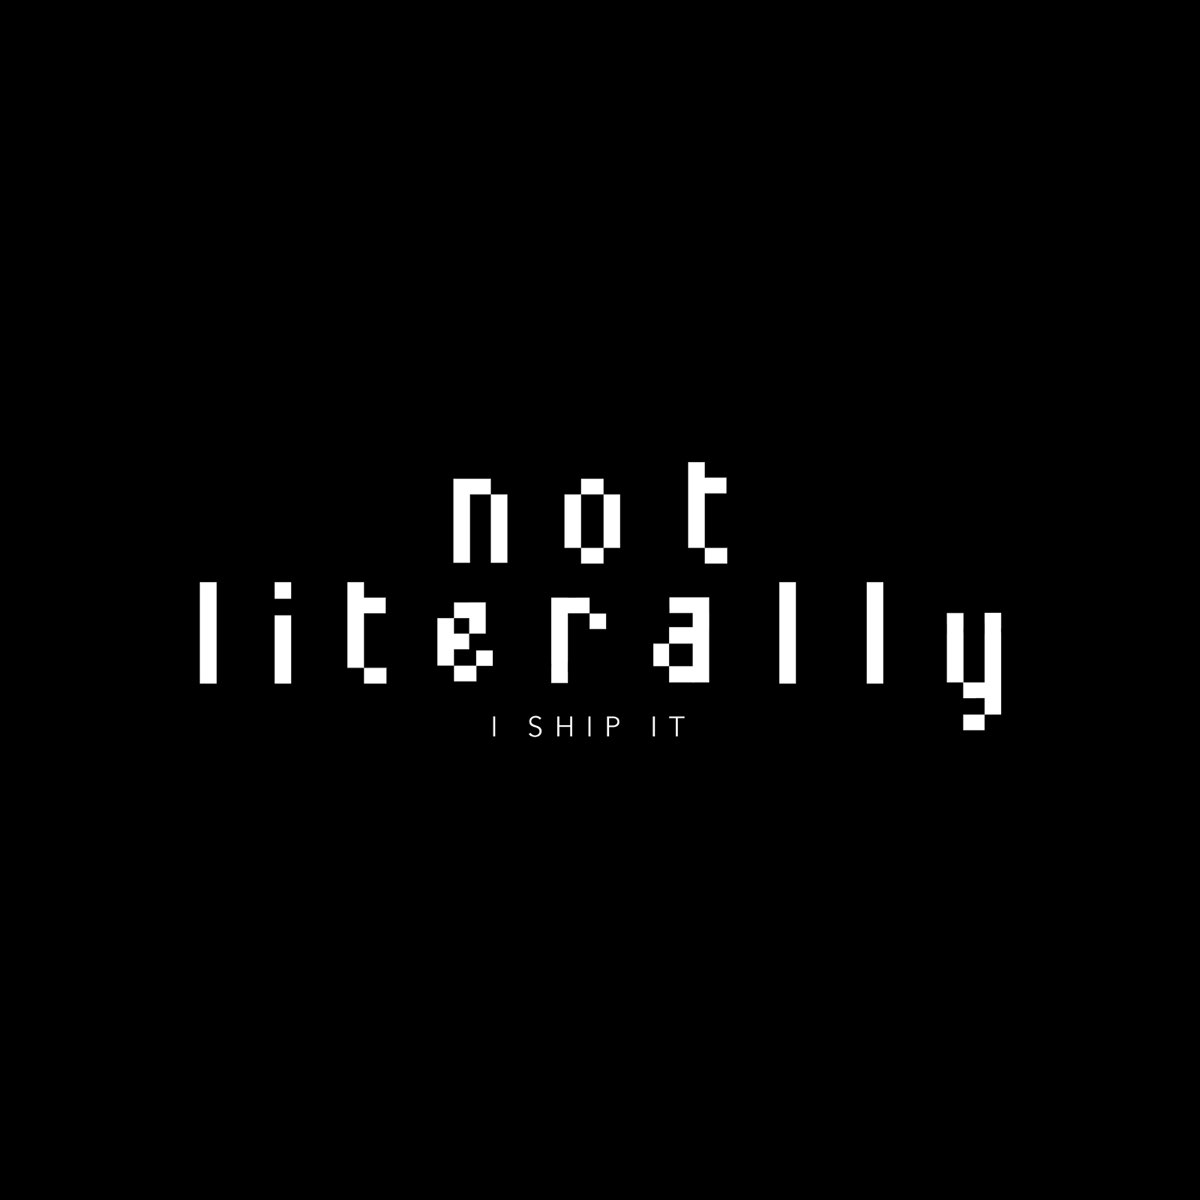 I Ship It - Single - Album by Not Literally - Apple Music